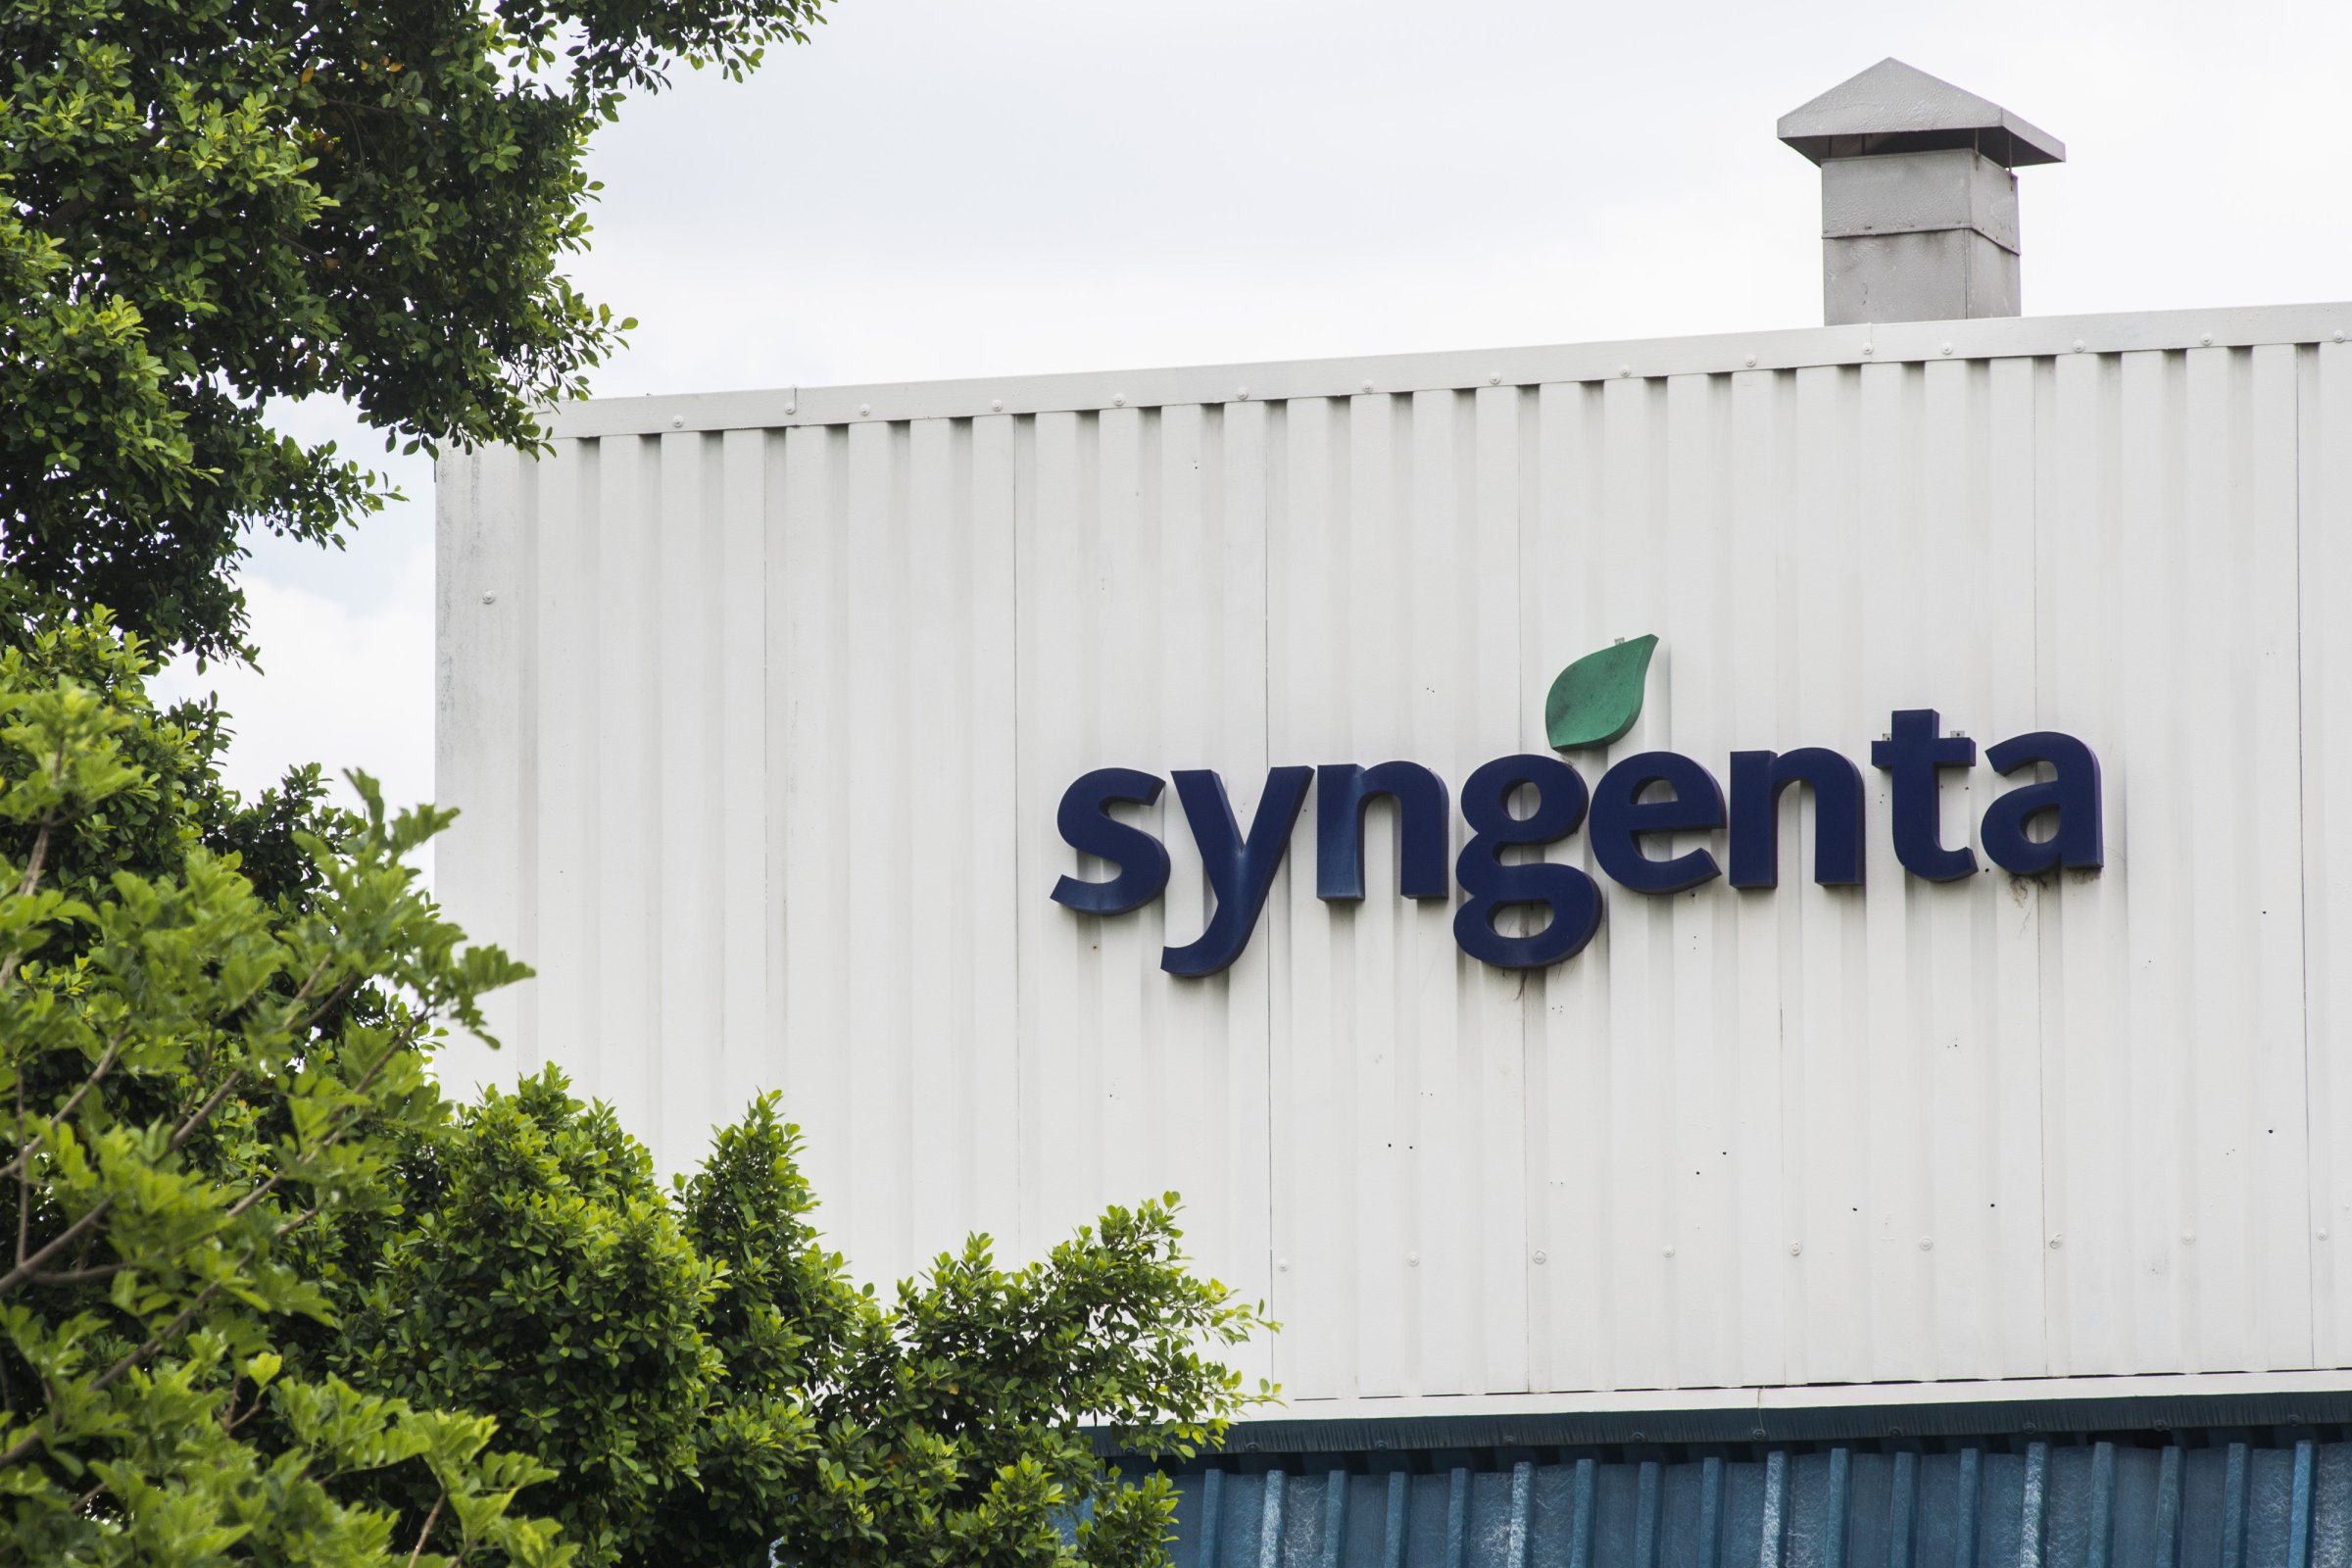 A logo sits on display outside the Syngenta AG plant in Brits, South Africa, on Wednesday, Feb. 3, 2016.